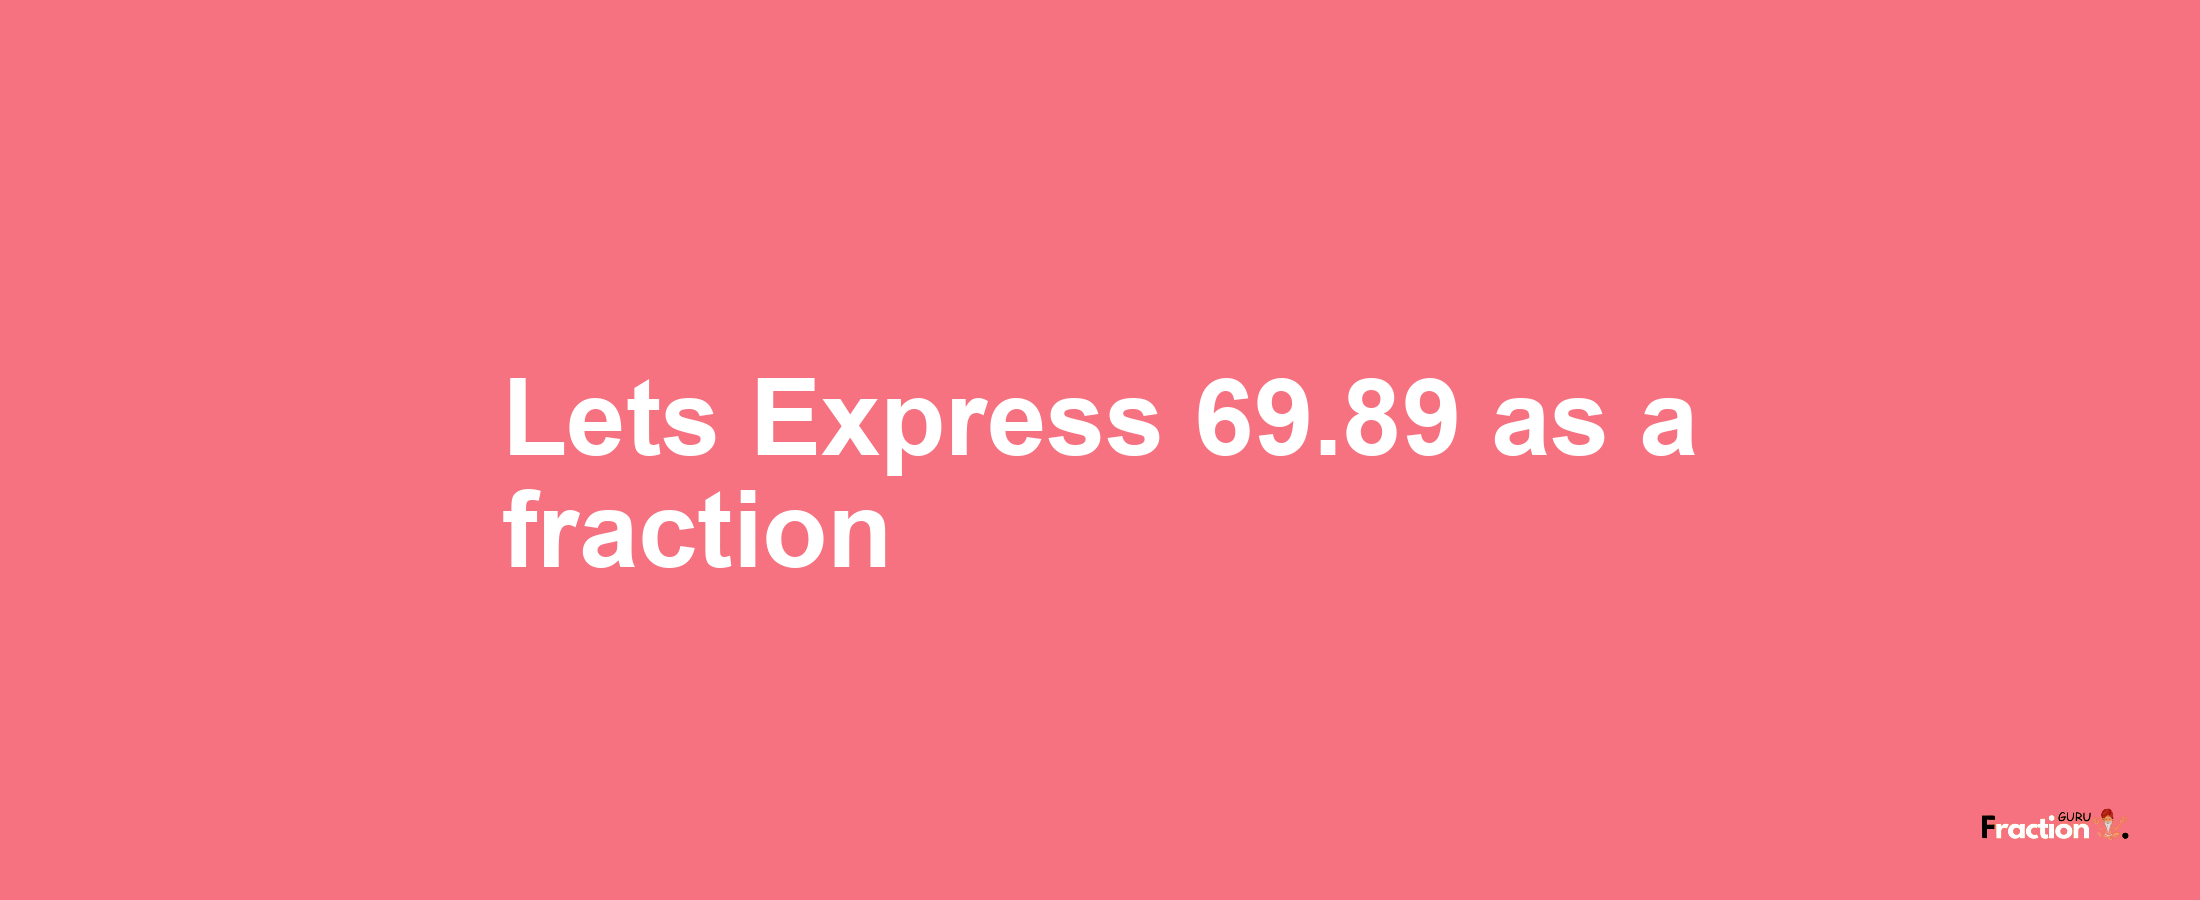 Lets Express 69.89 as afraction